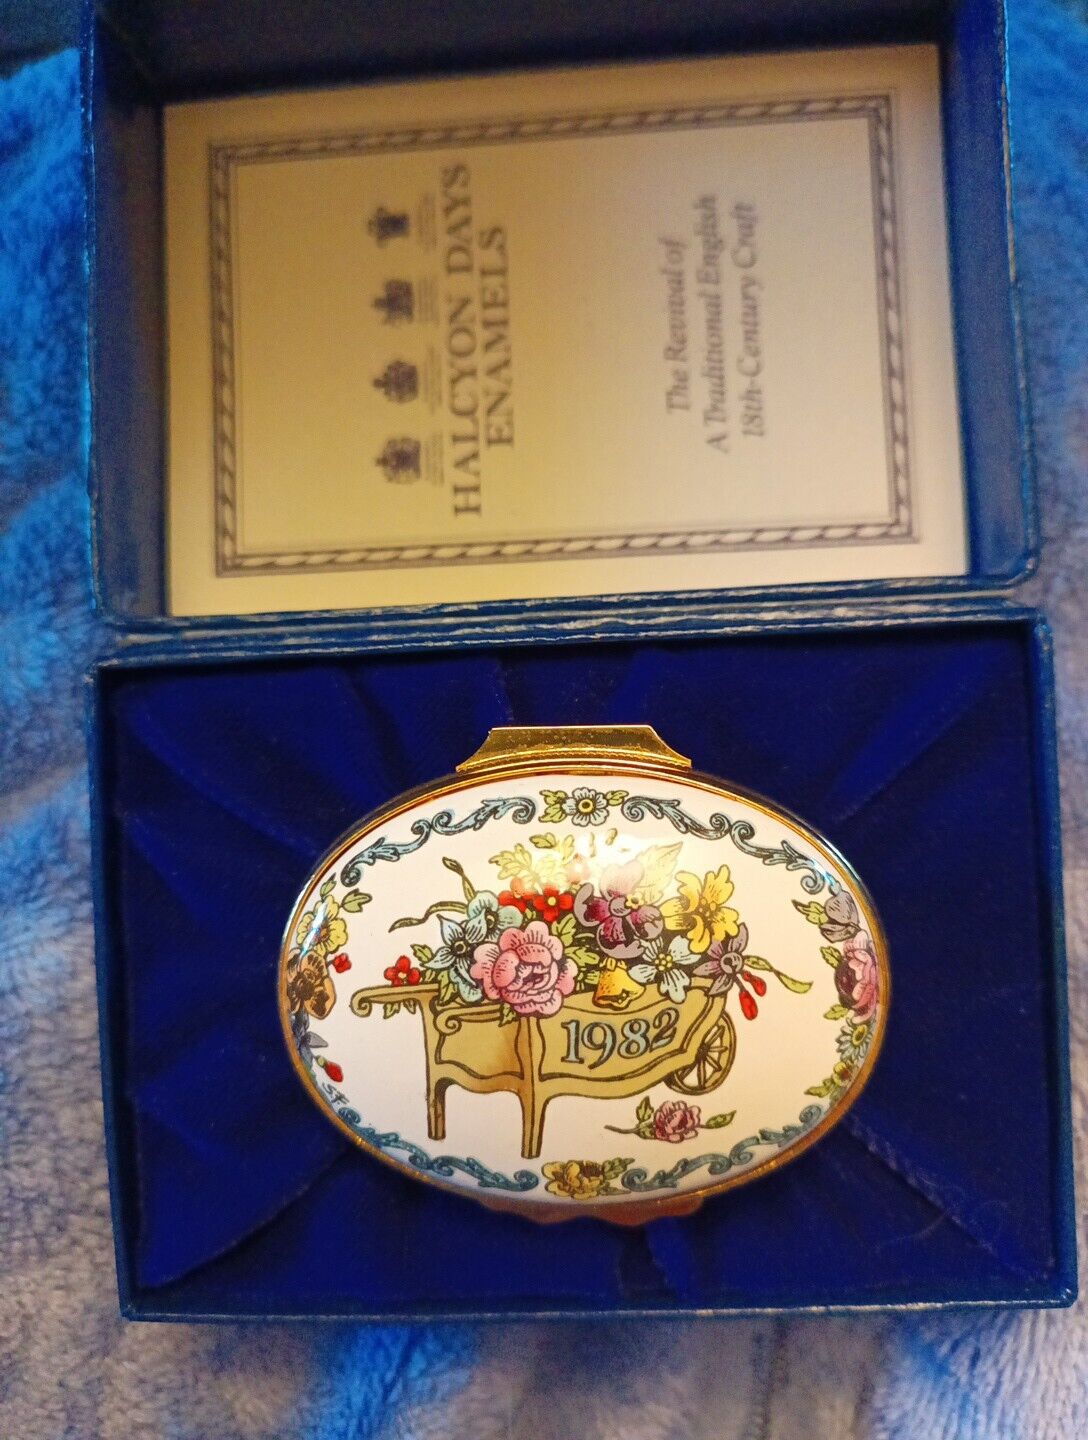 Halcyon Days Enamel Trinket Box “A Year to Remember” 1982  New with Pamphlet